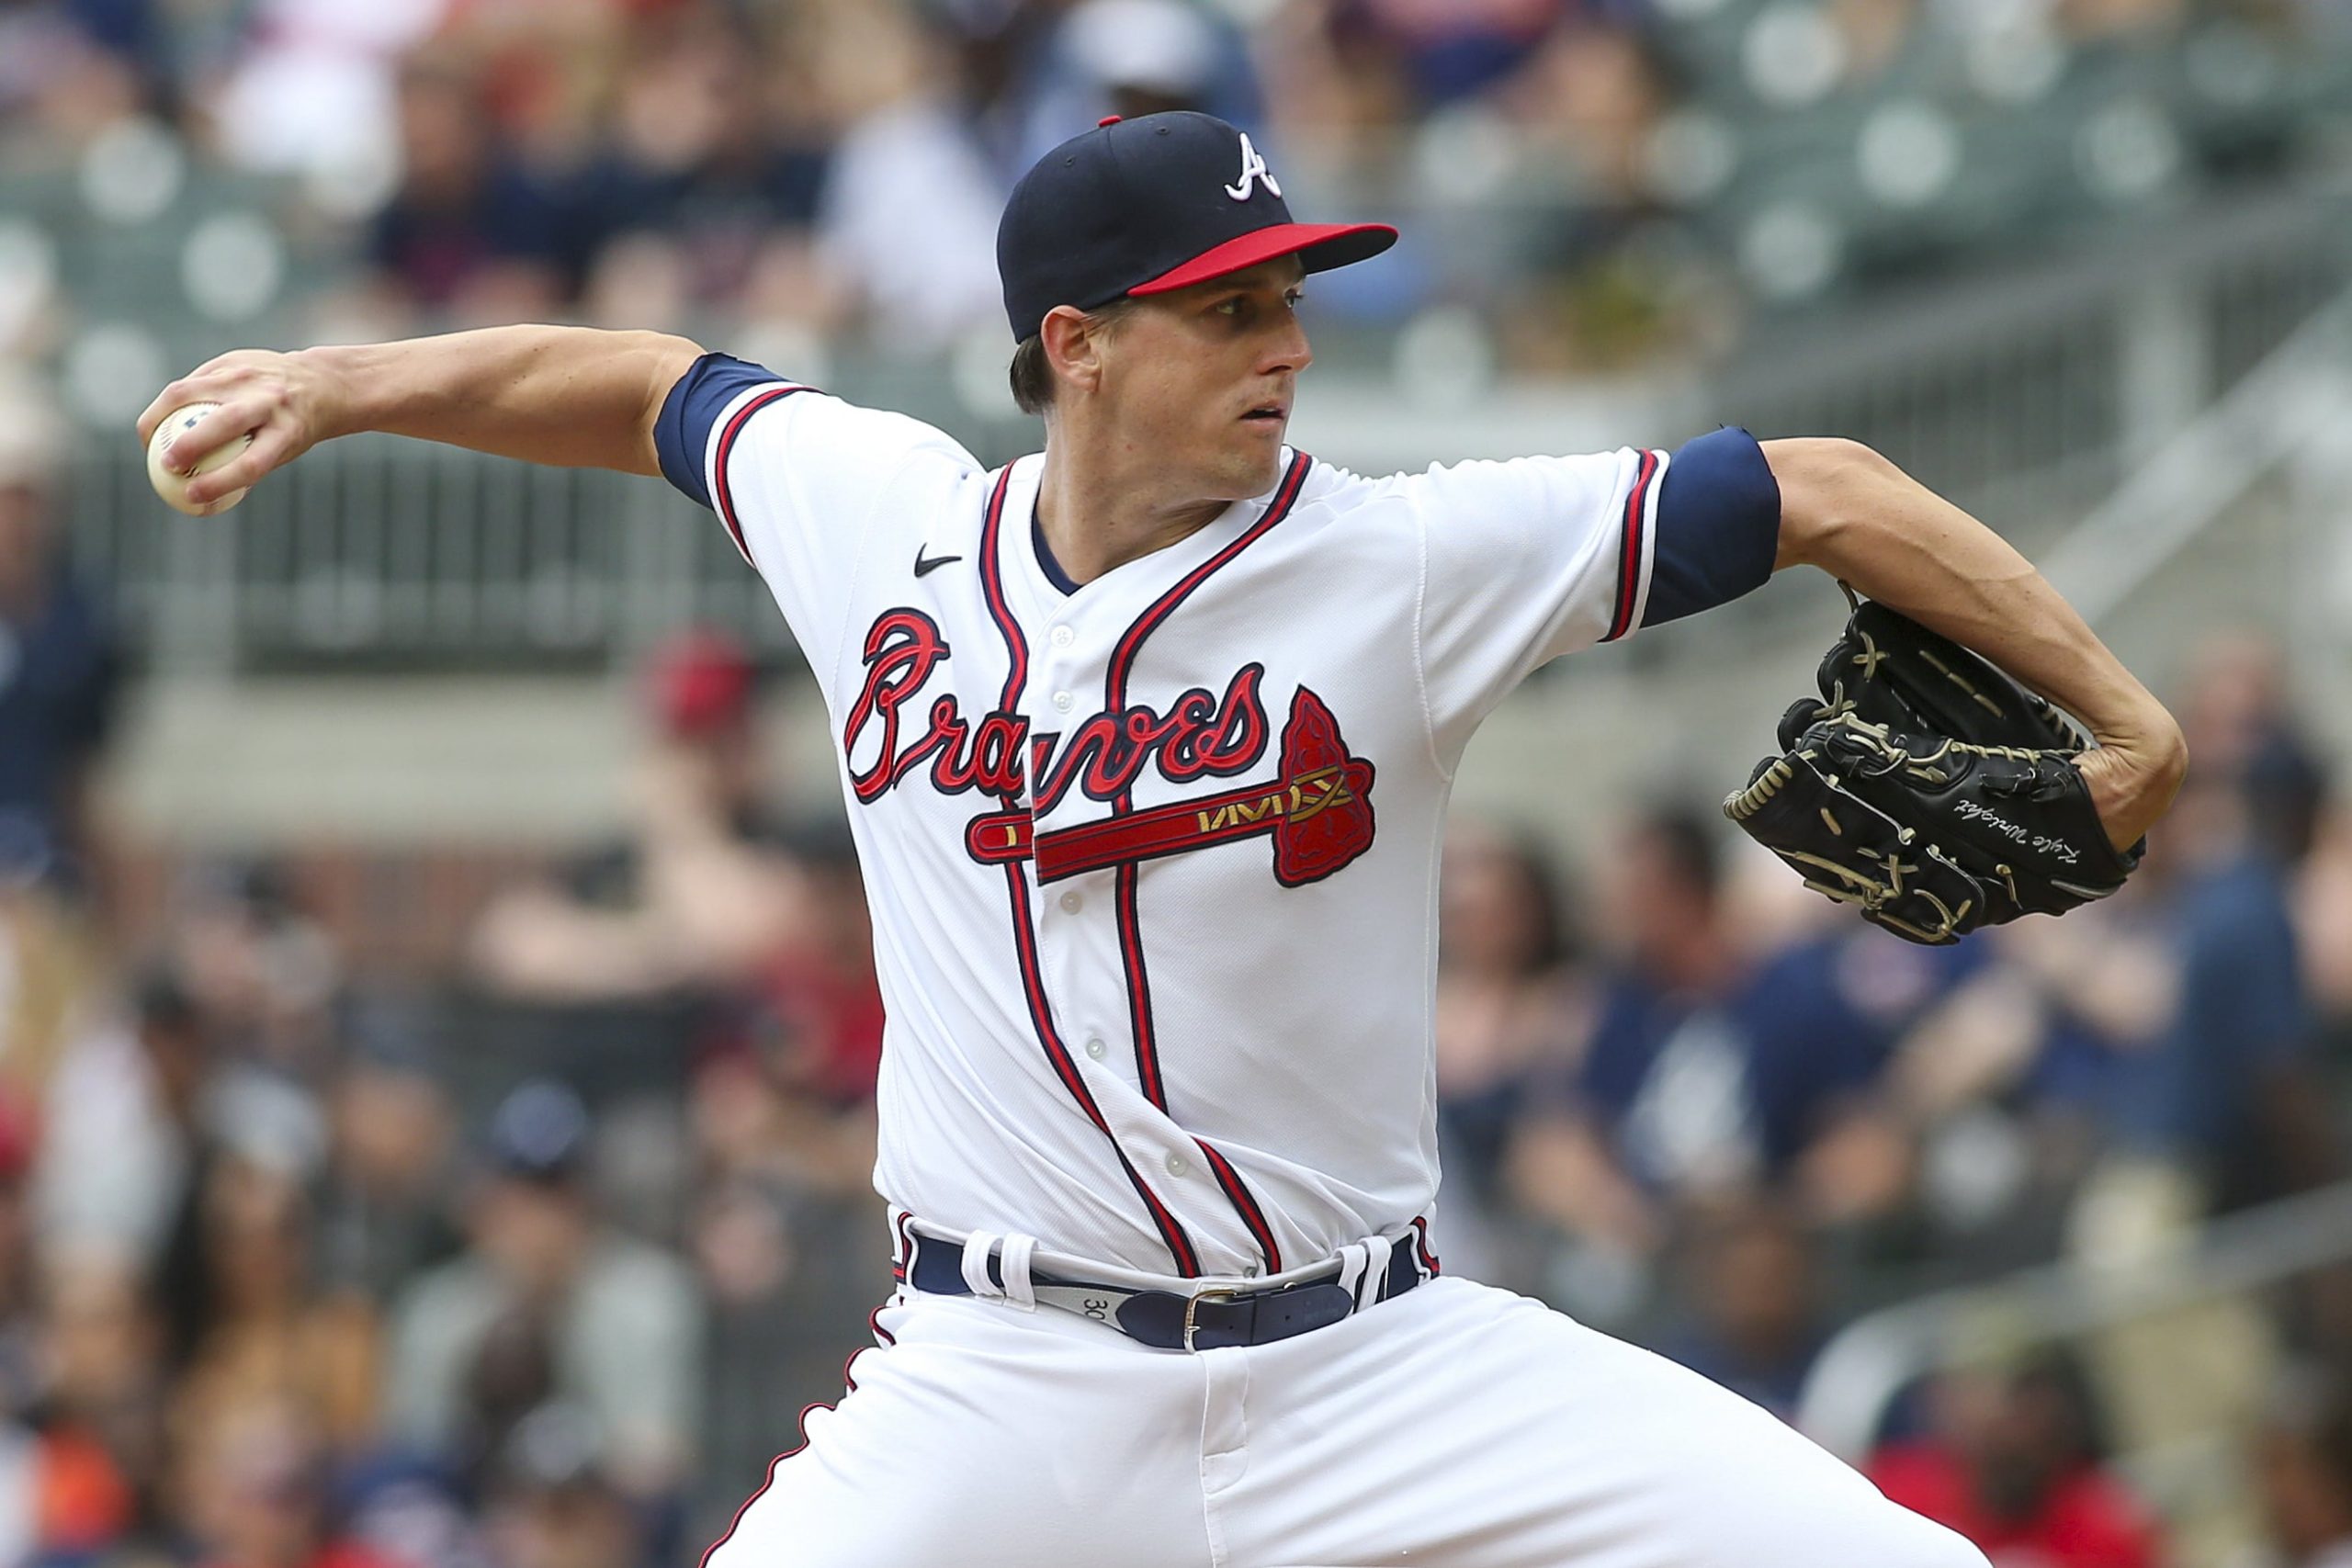 May 15, 2022; Atlanta, Georgia, USA; Atlanta Braves starting pitcher Kyle Wright (30) throws against the San Diego Padres in the first inning at Truist Park. Mandatory Credit: Brett Davis-USA TODAY Sports